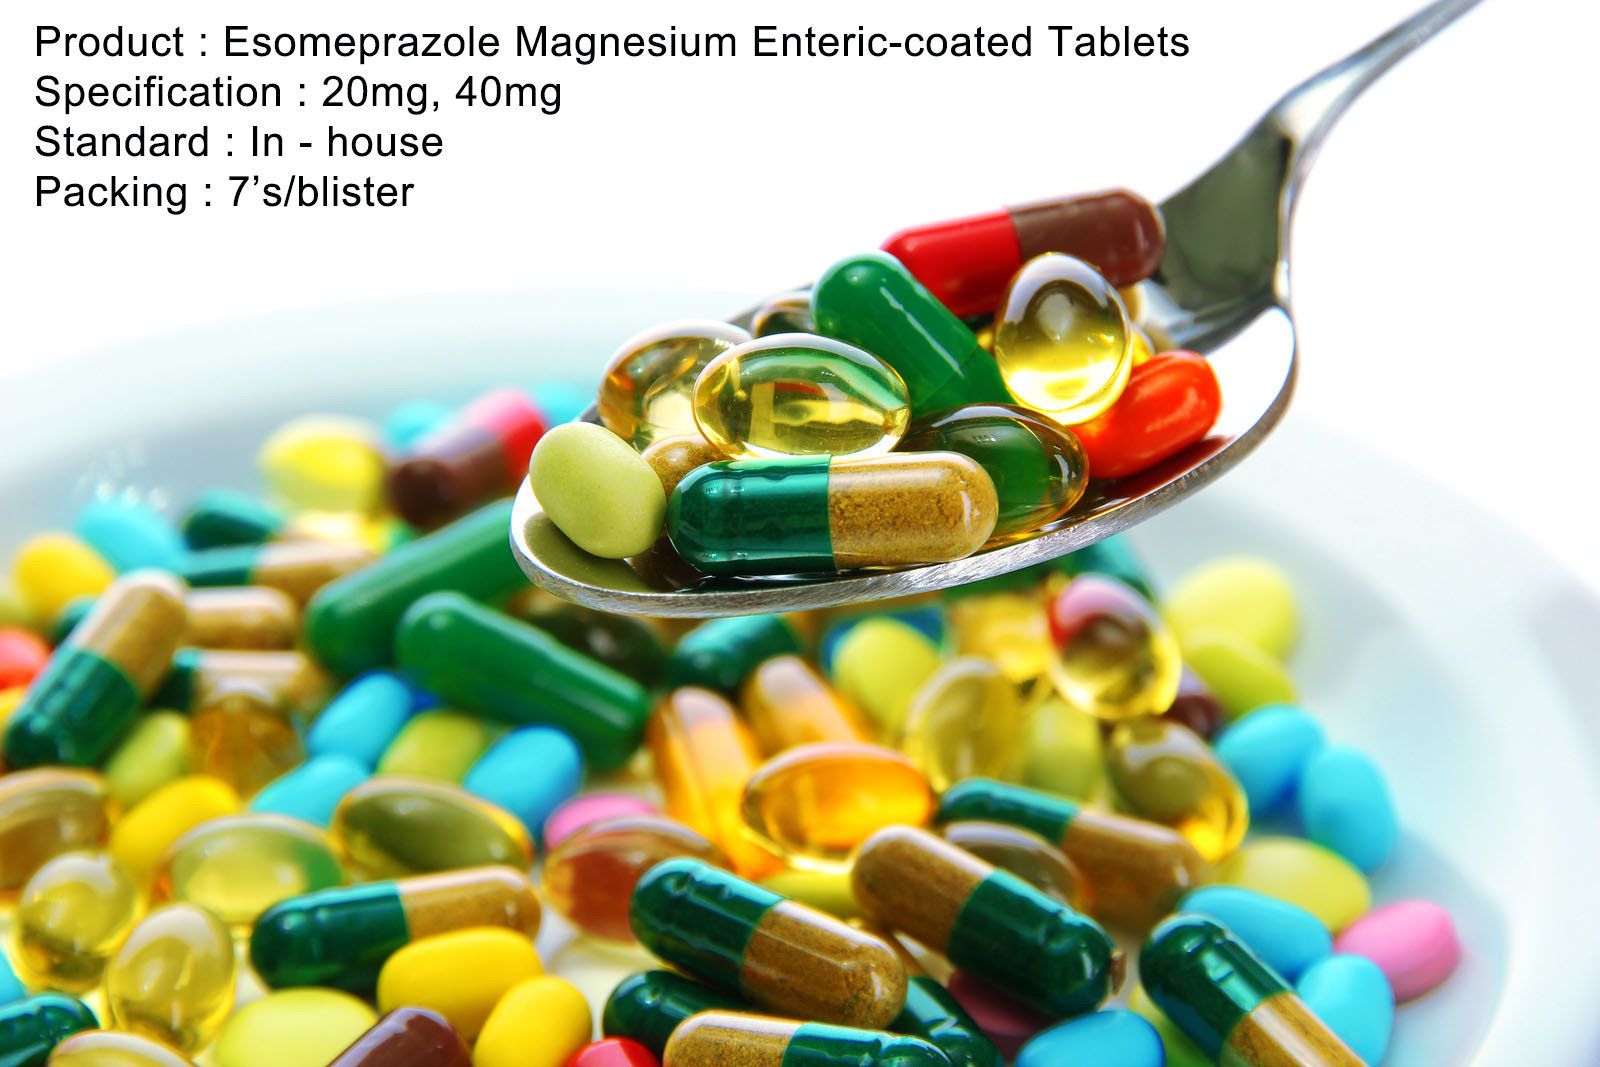 Esomeprazole Magnesium Enteric-coated Tablets 20mg, 40mg Oral Medications